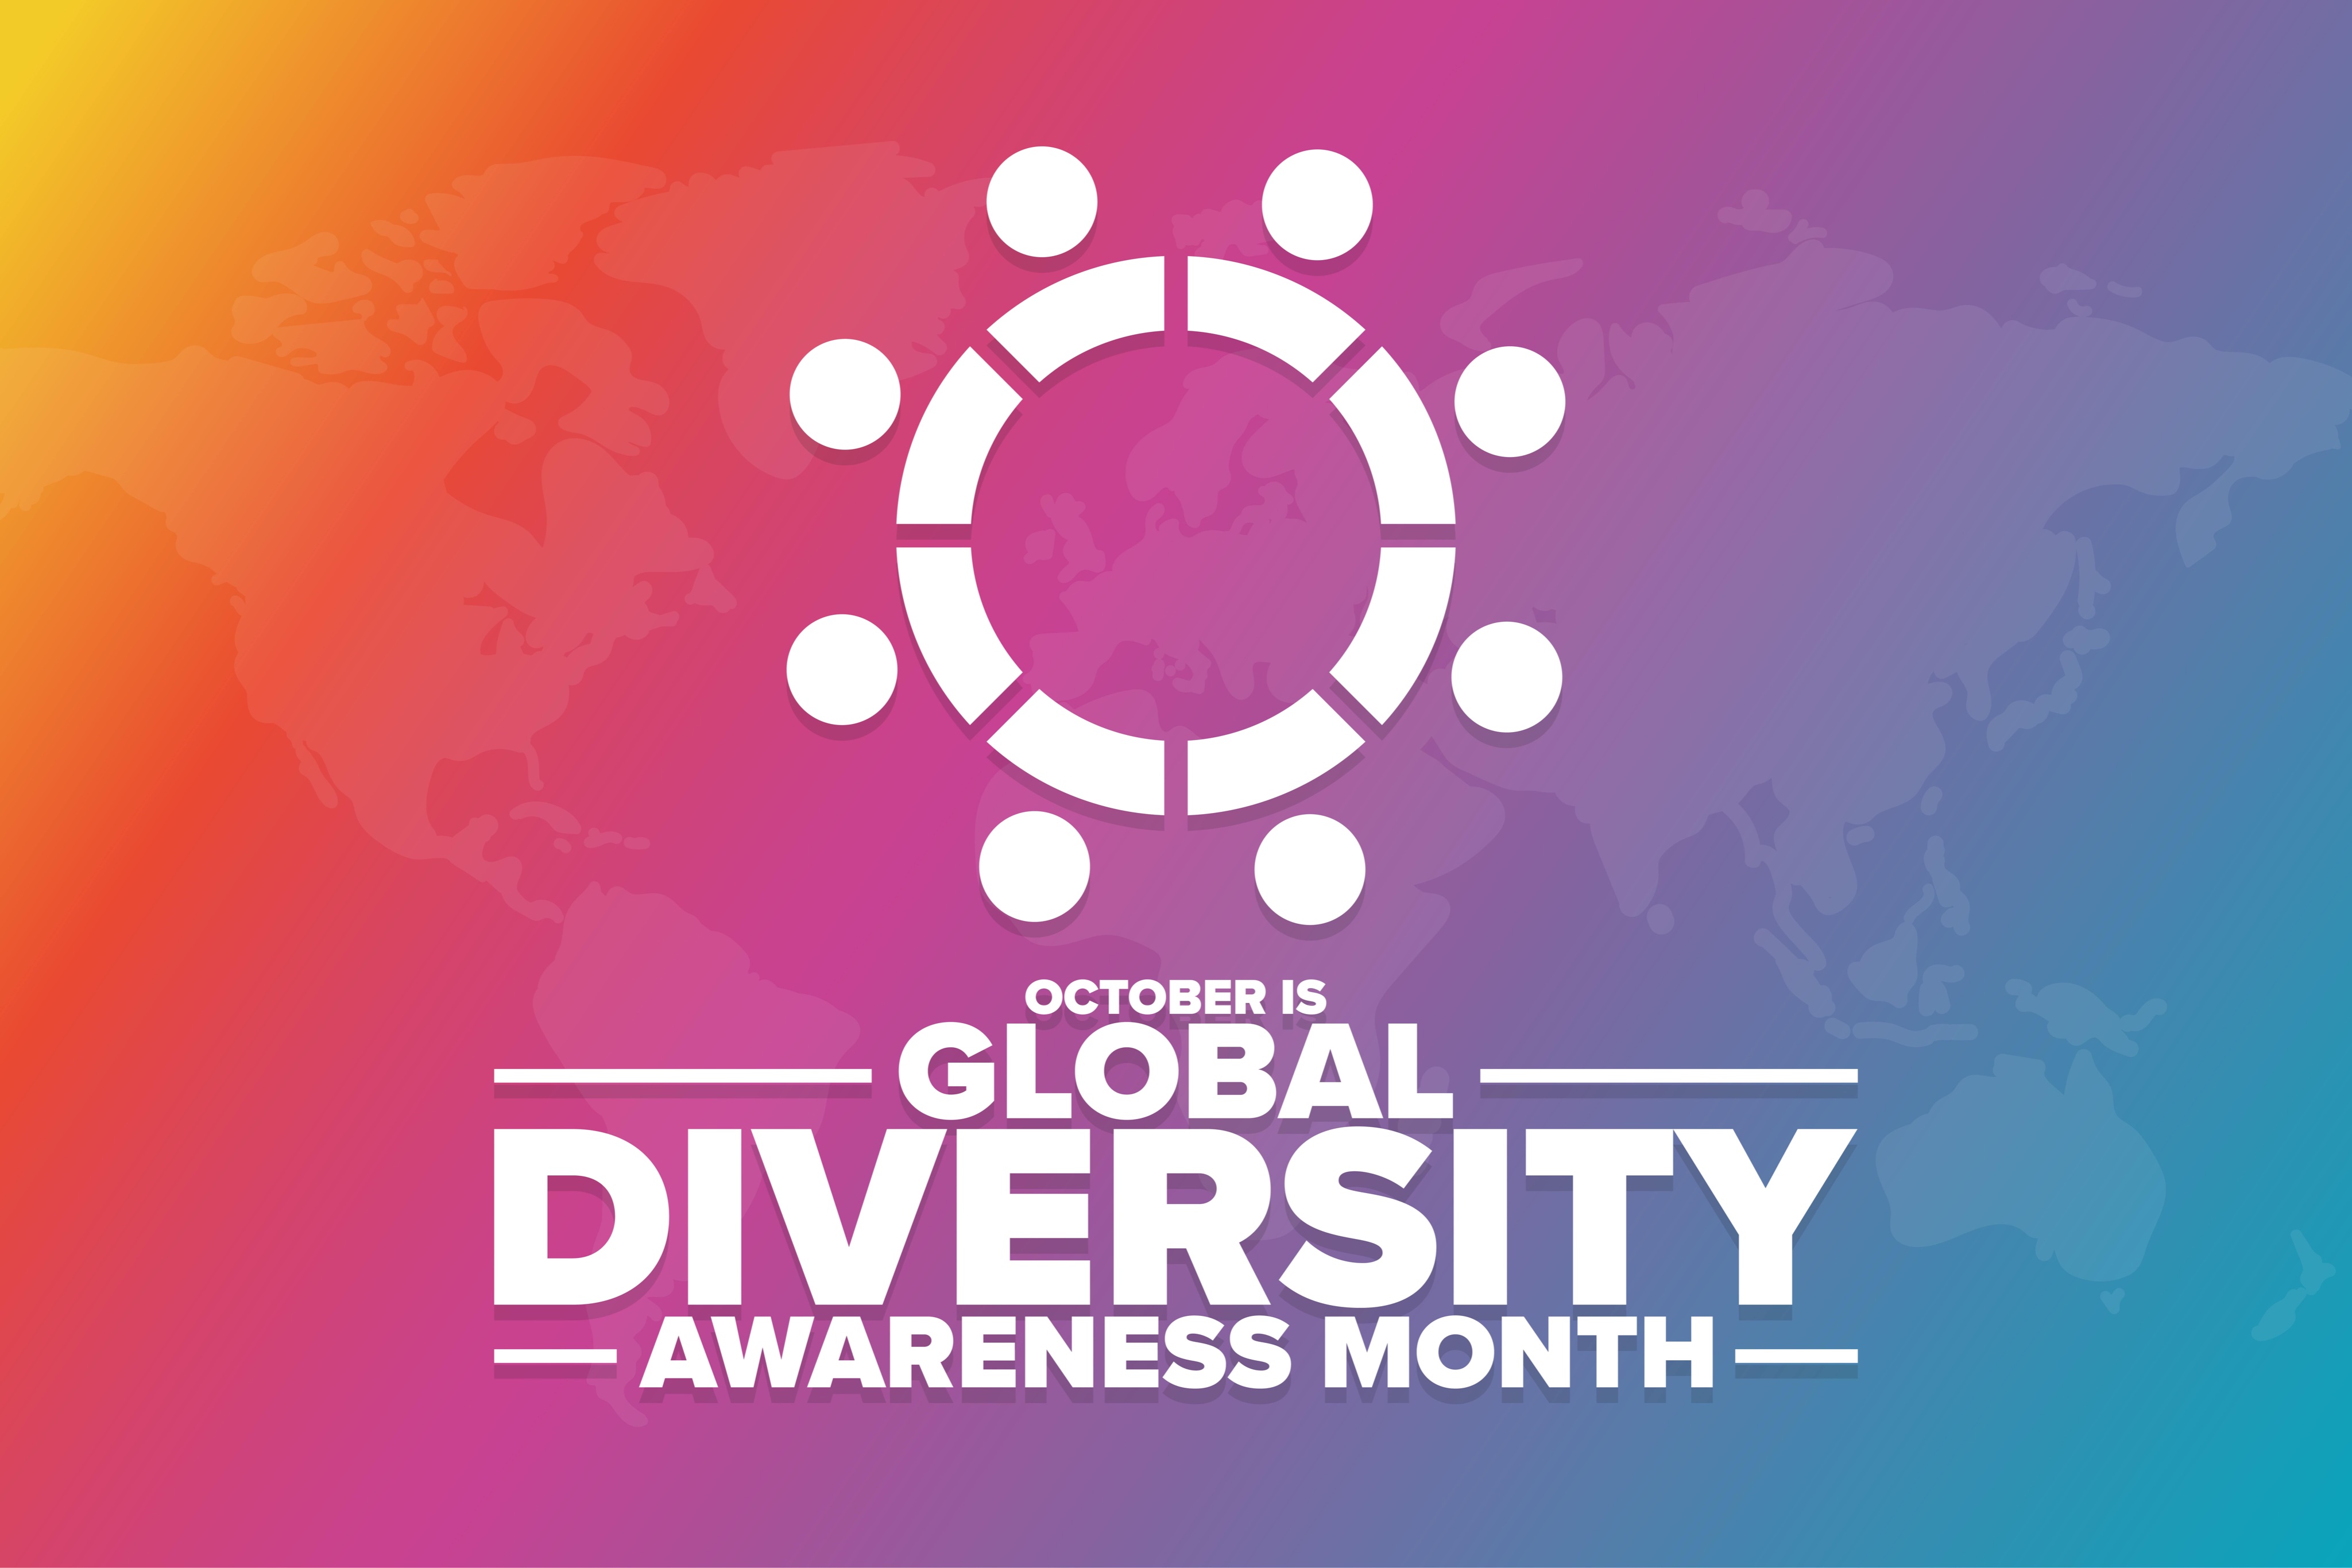 Colorful background with white text that reads, "October is Global Diversity Awareness Month."